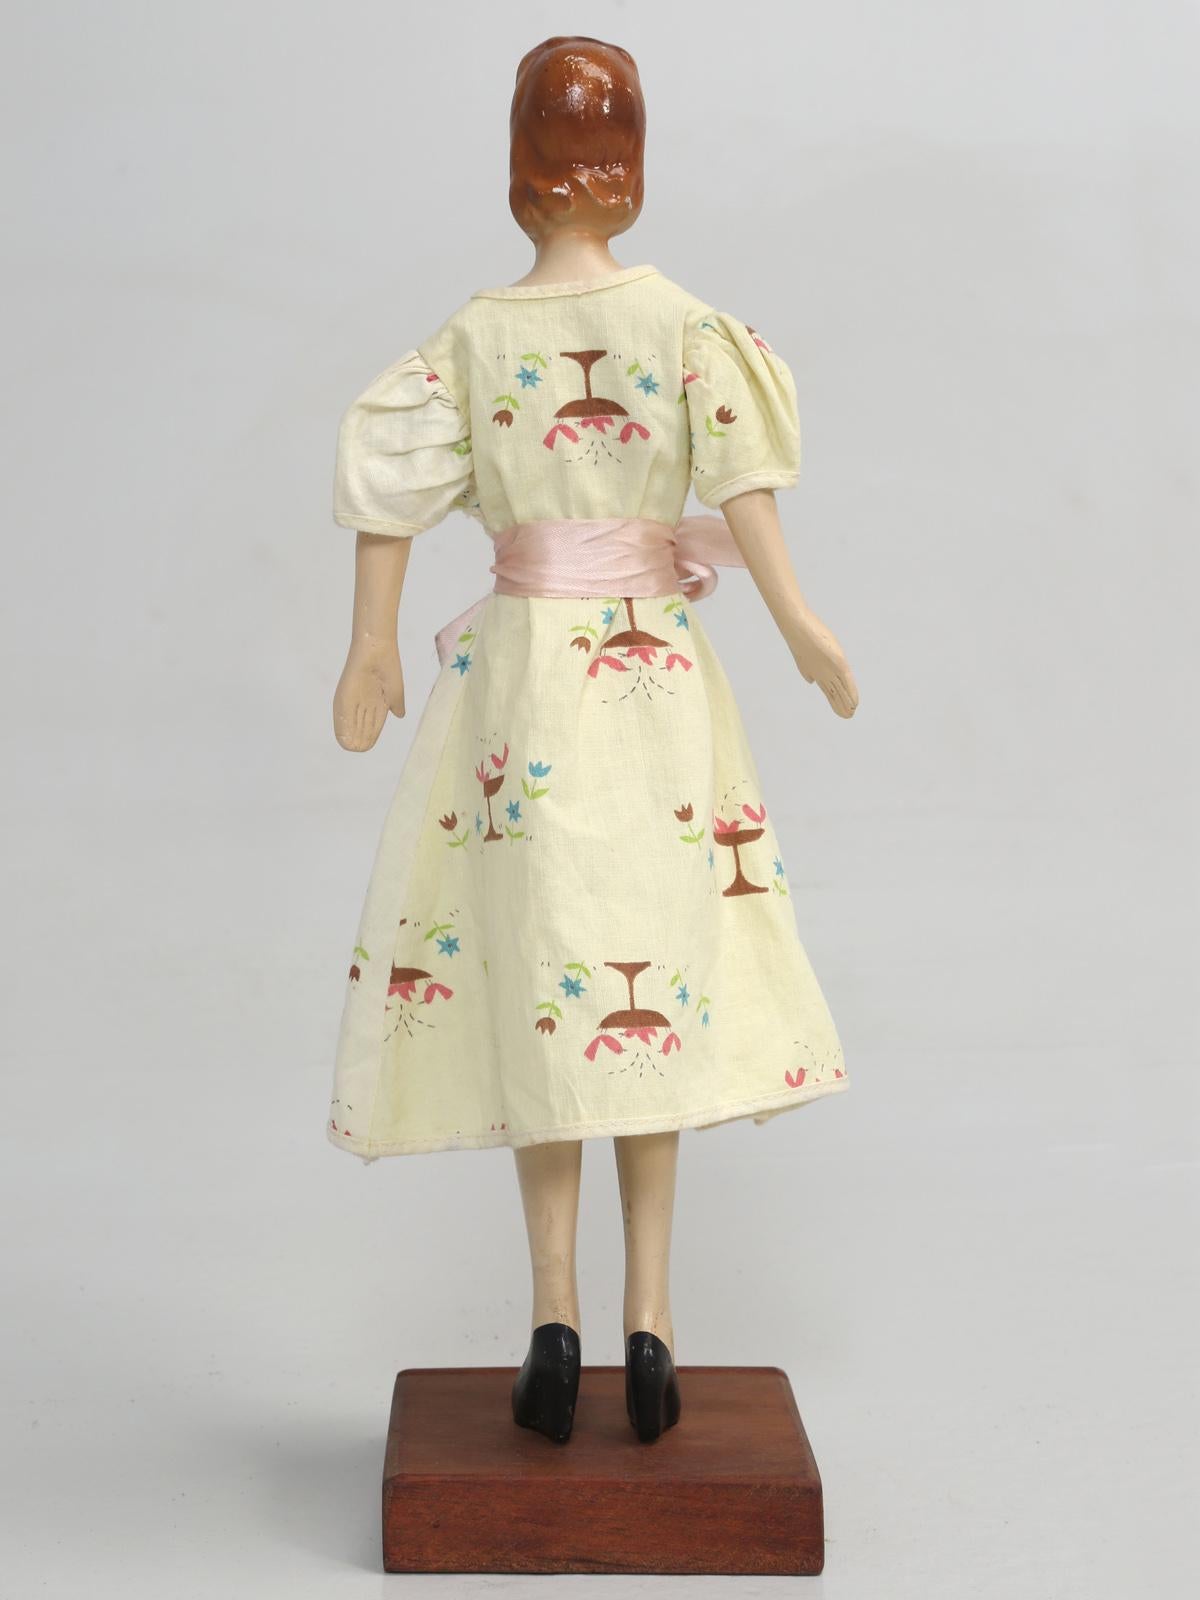 Miniature Department Store Mannequin, Used on a Display Counter 5